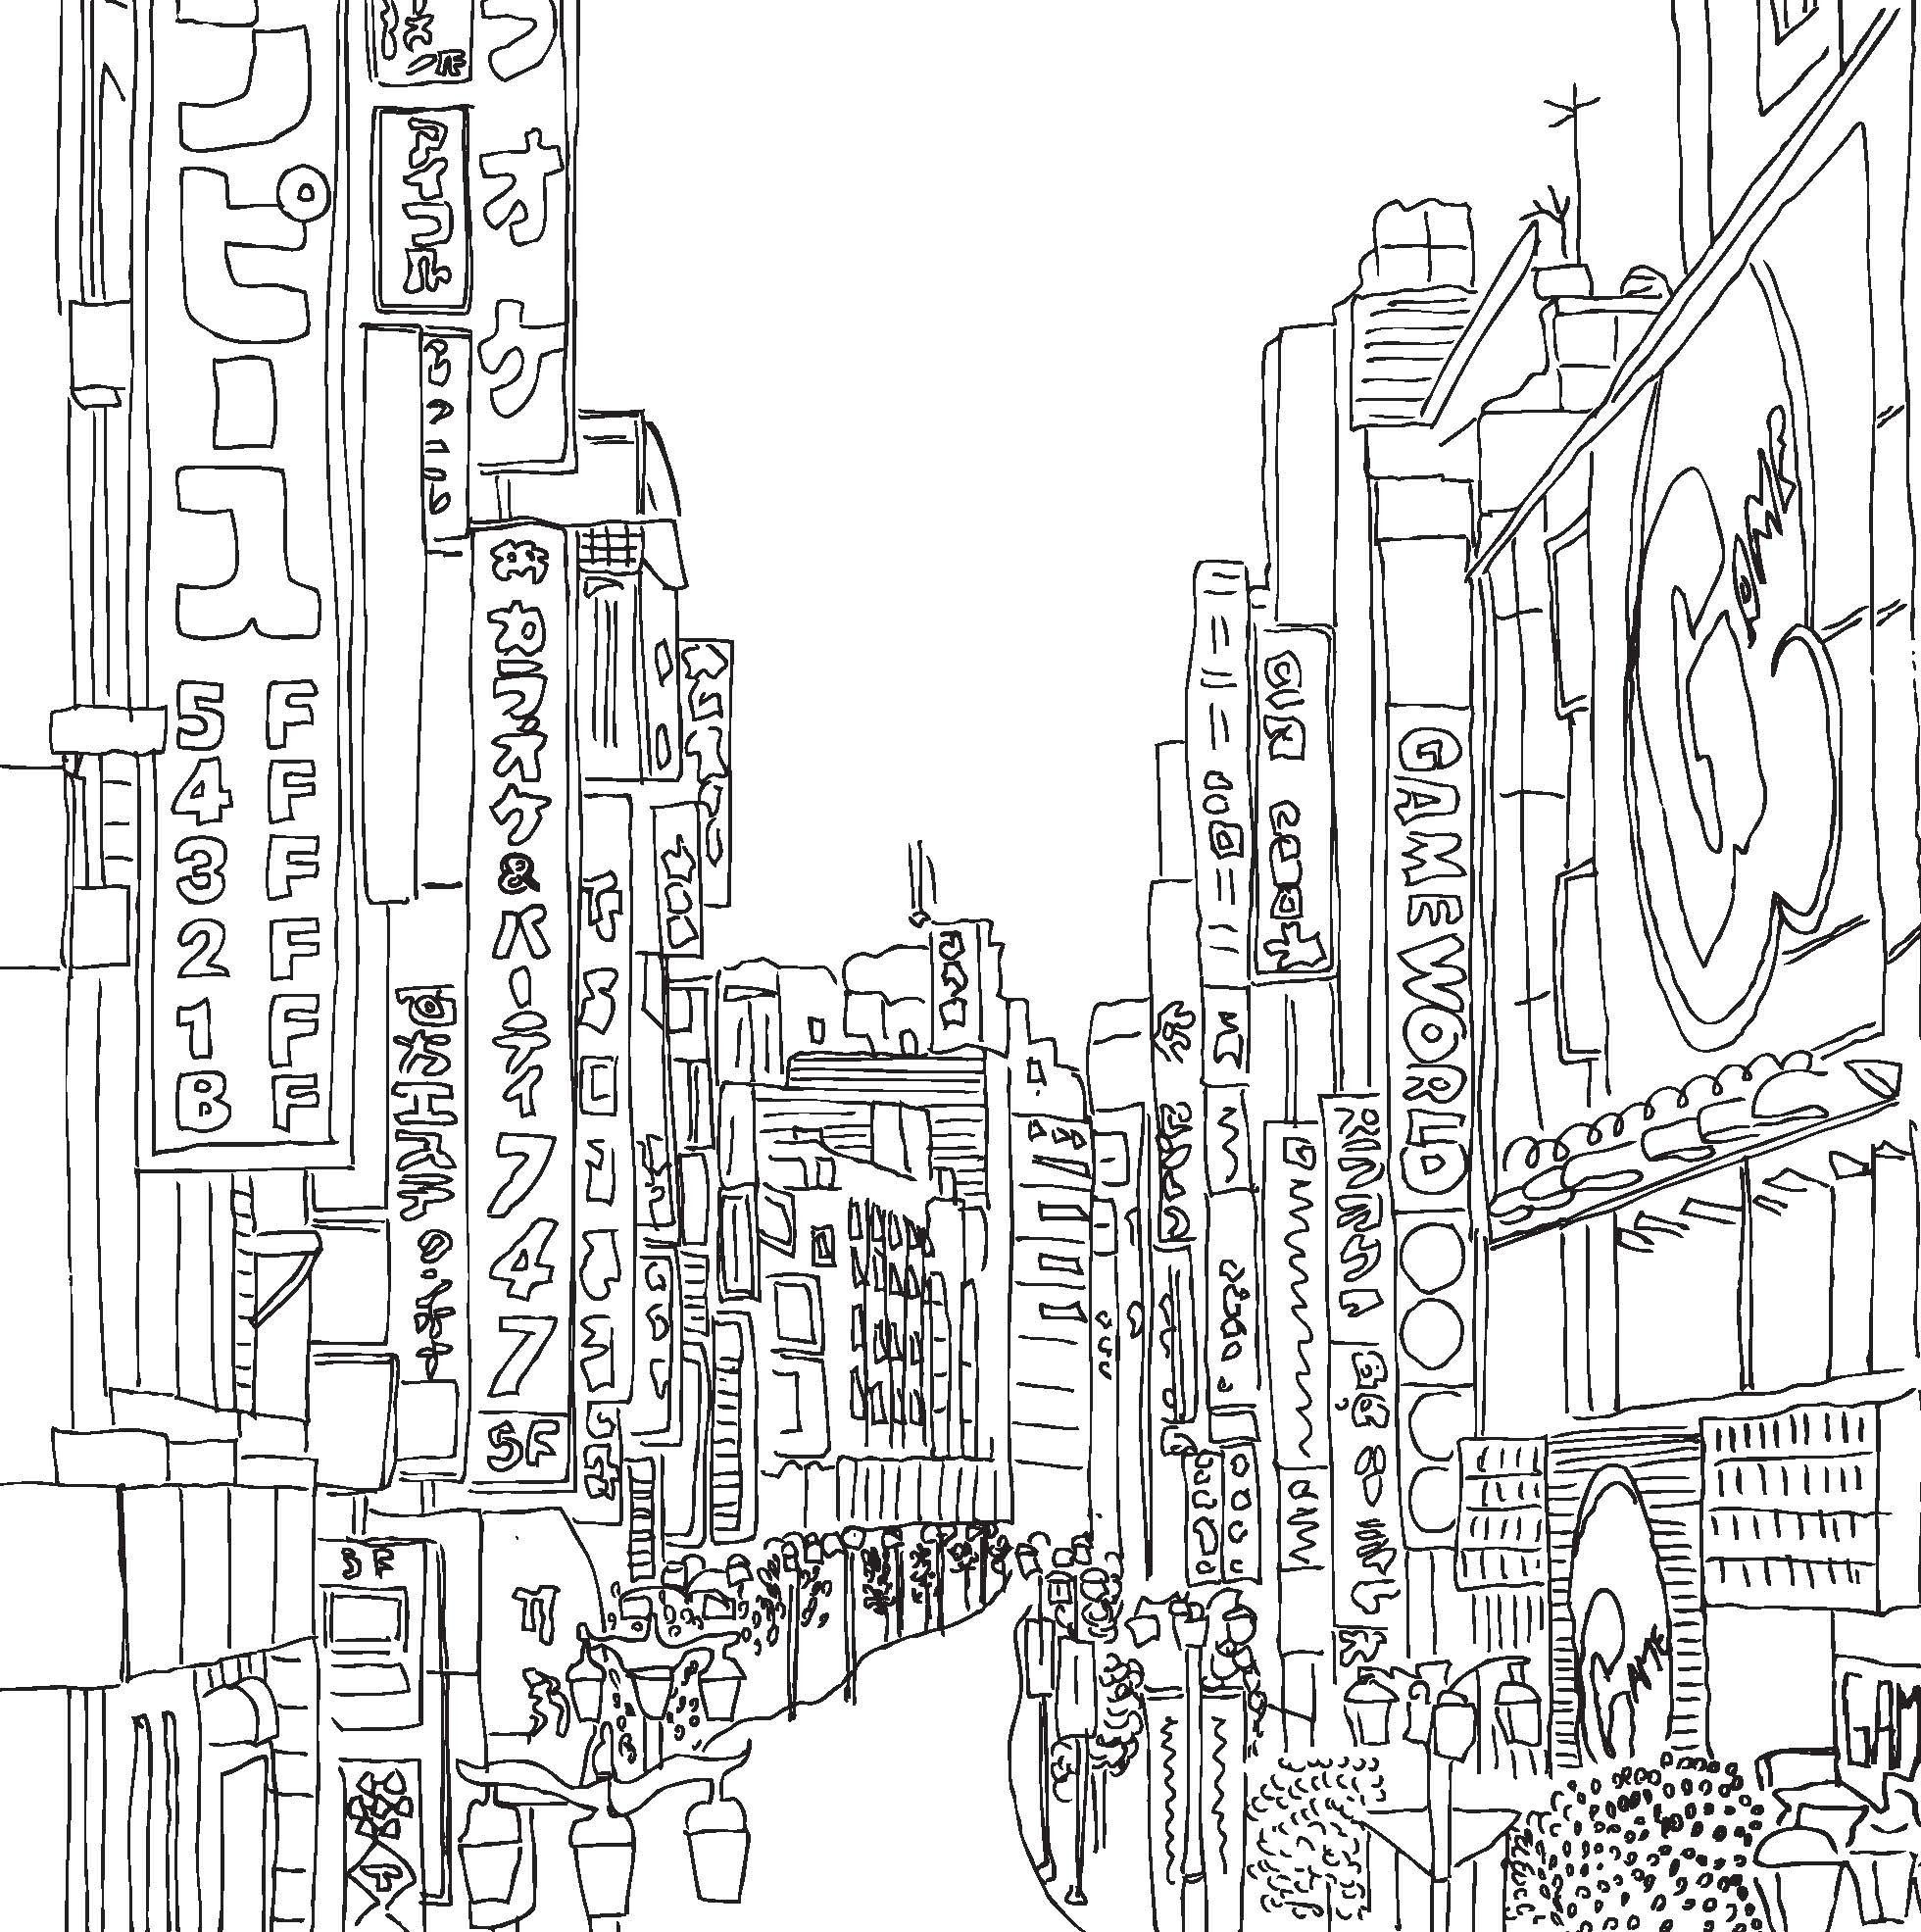 free-cities-coloring-pages-download-free-cities-coloring-pages-png-images-free-cliparts-on